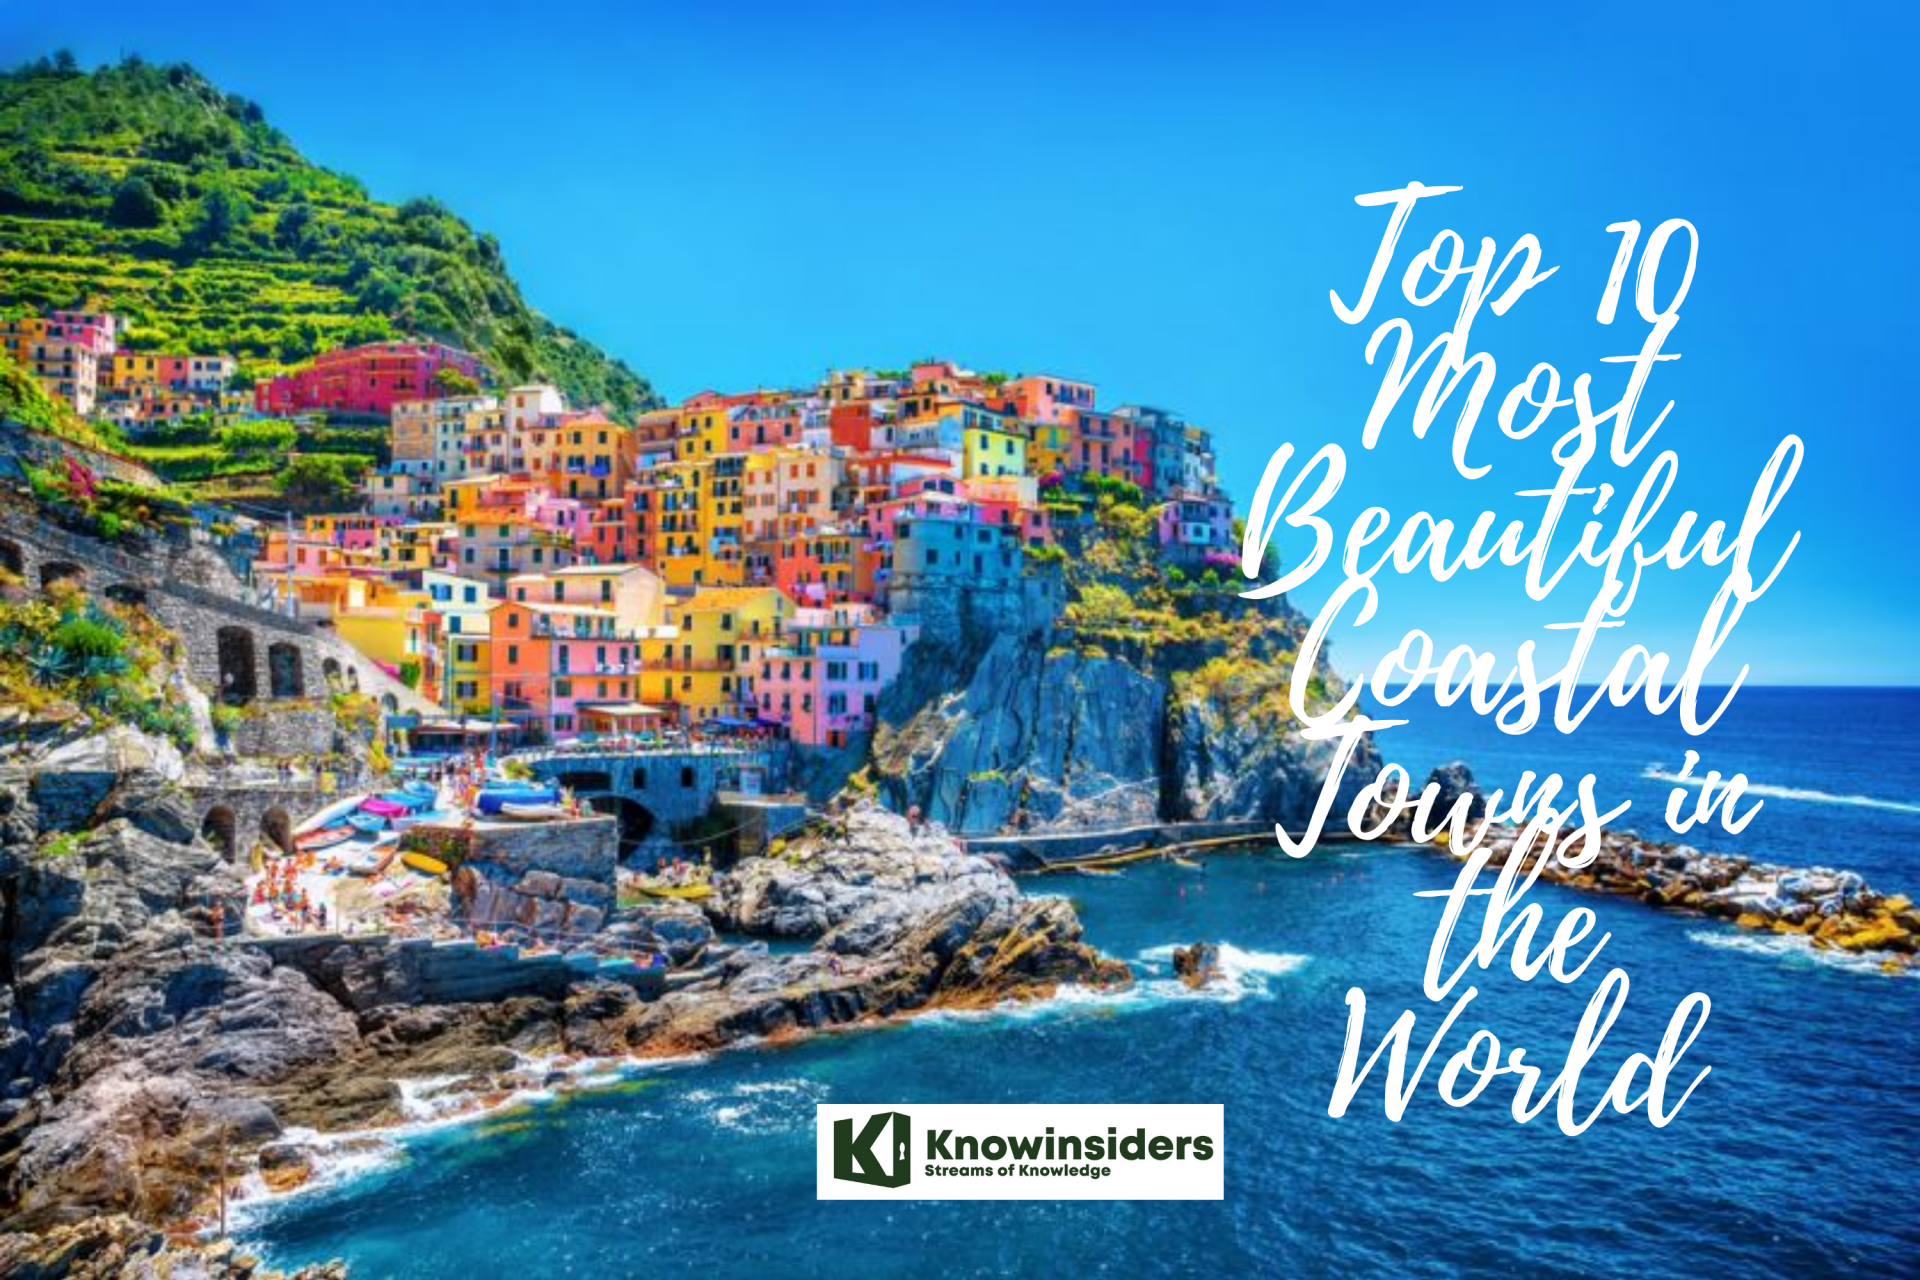 Top 10 Most Beautiful Coastal Towns in the World